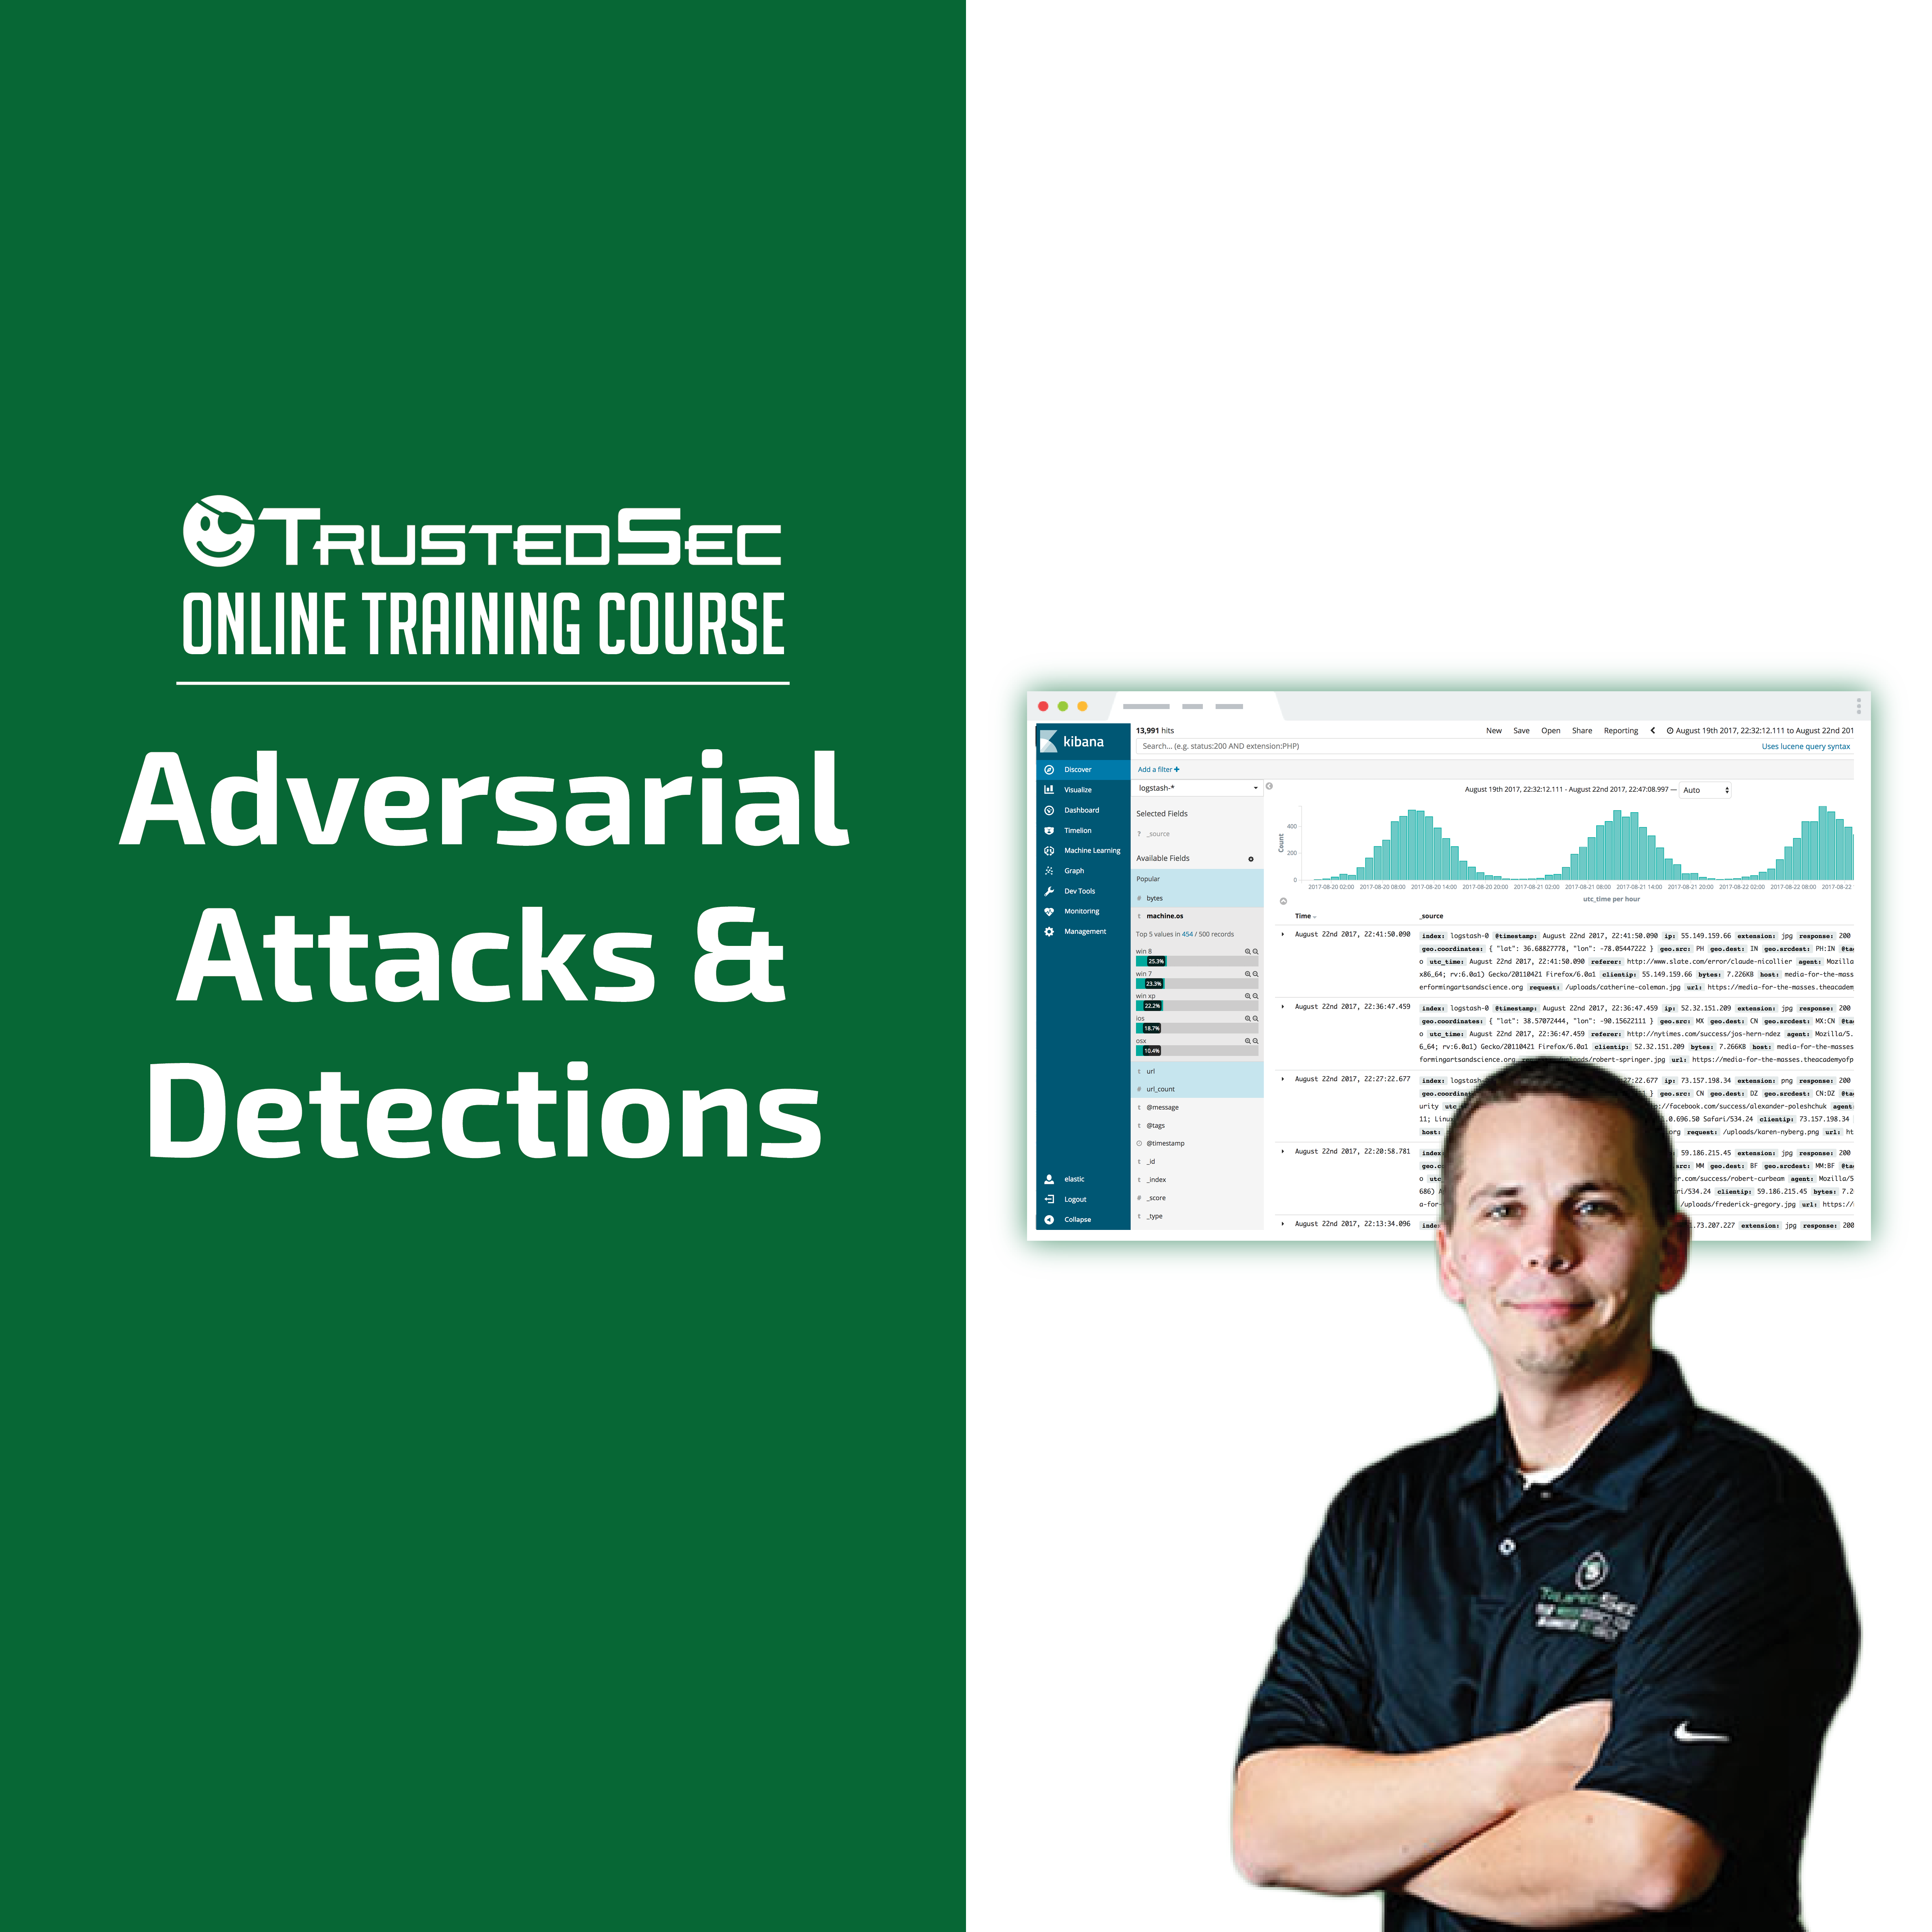 https://www.trustedsec.com/wp-content/uploads/2020/04/060420-Adversarial-Attack-Square.png